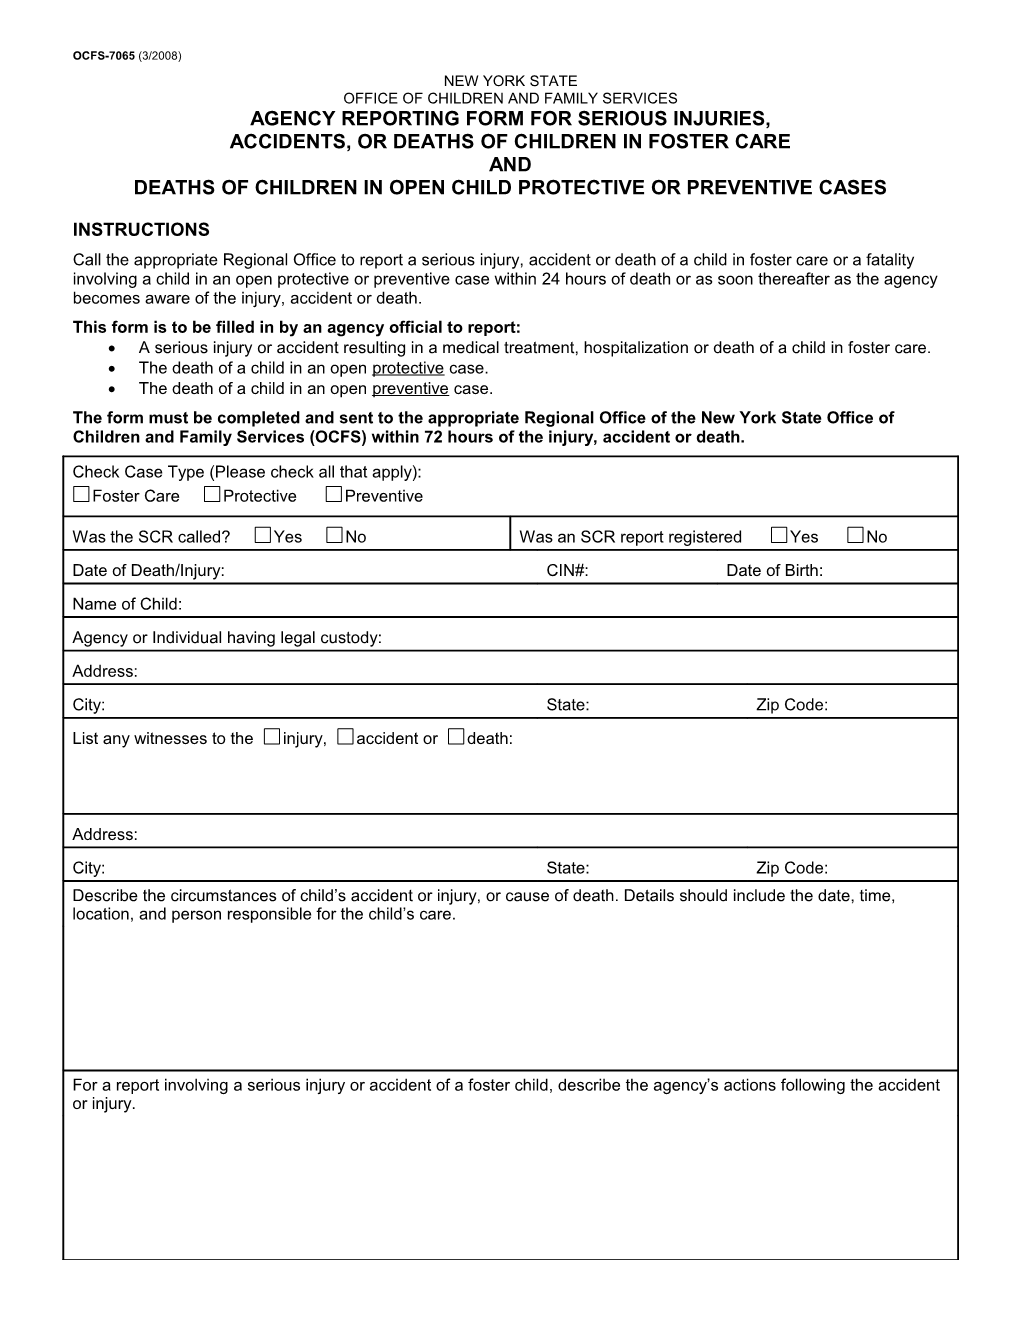 Agency Reporting Form for Serious Injuries